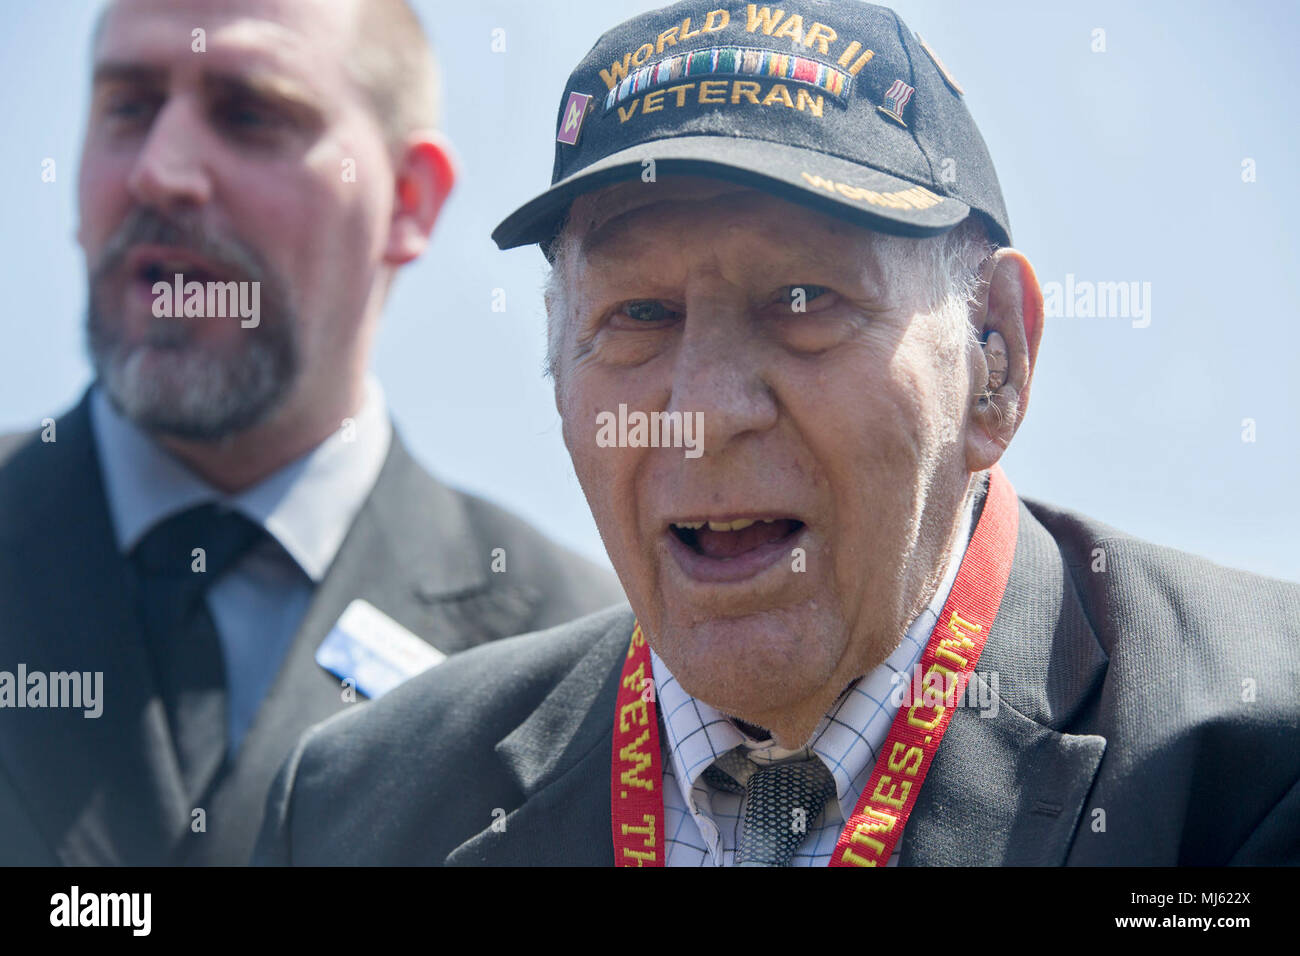 Iwo Jima veteran, Retired Marine Gunnery Sgt. Keith Renstrom, right, attends the 73rd Reunion of Honor at Iwo To, Japan, March 24, 2018. Iwo Jima veterans, families, Marines, Japanese troops and officials attended the ceremony commemorating the lives of those lost in one of the most iconic battles of World War II. (U.S. Marine Corps Image collection celebrating the bravery dedication commitment and sacrifice of U.S. Armed Forces and civilian personnel. Stock Photo